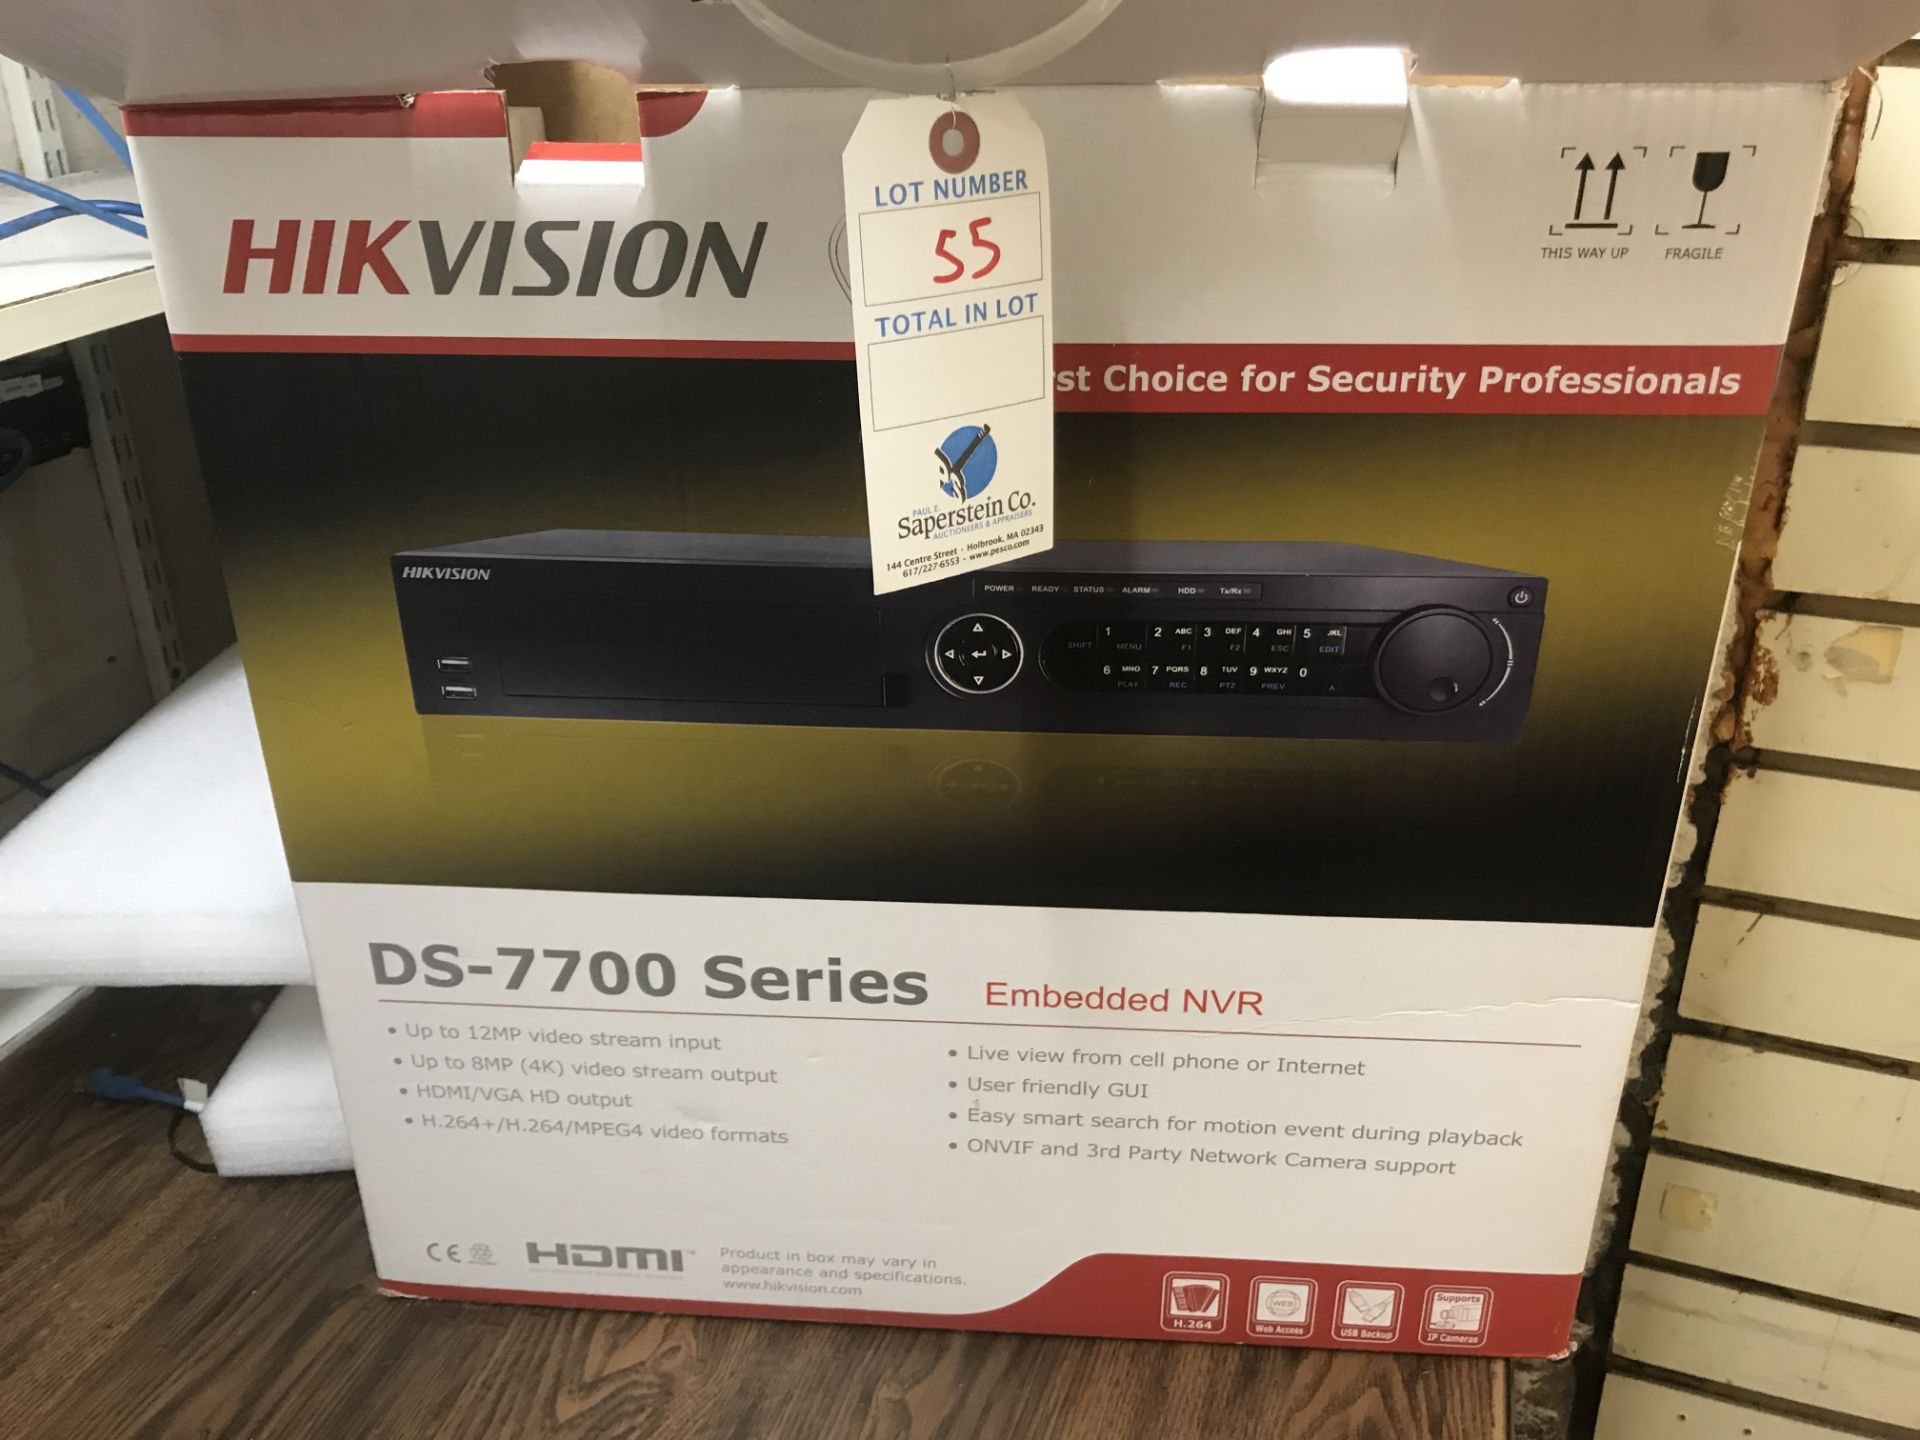 Hikvision #DS7700 Series Embedded NVR - Live View From Cell Phone or Internet (NIB)